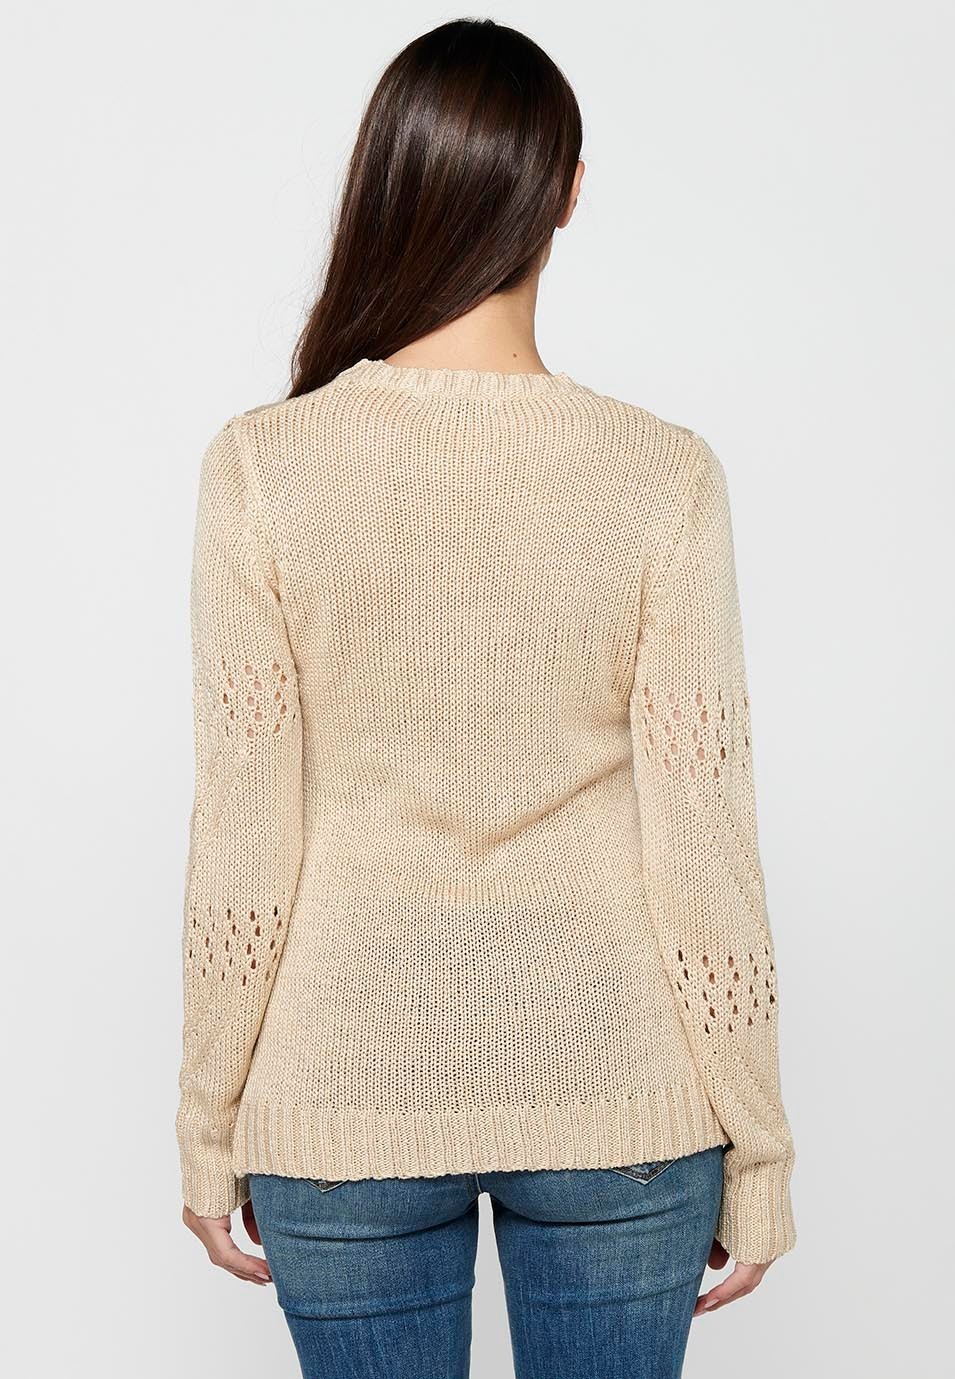 Long sleeve sweater with round neck. Beige Openwork Front Tricot for Women 6